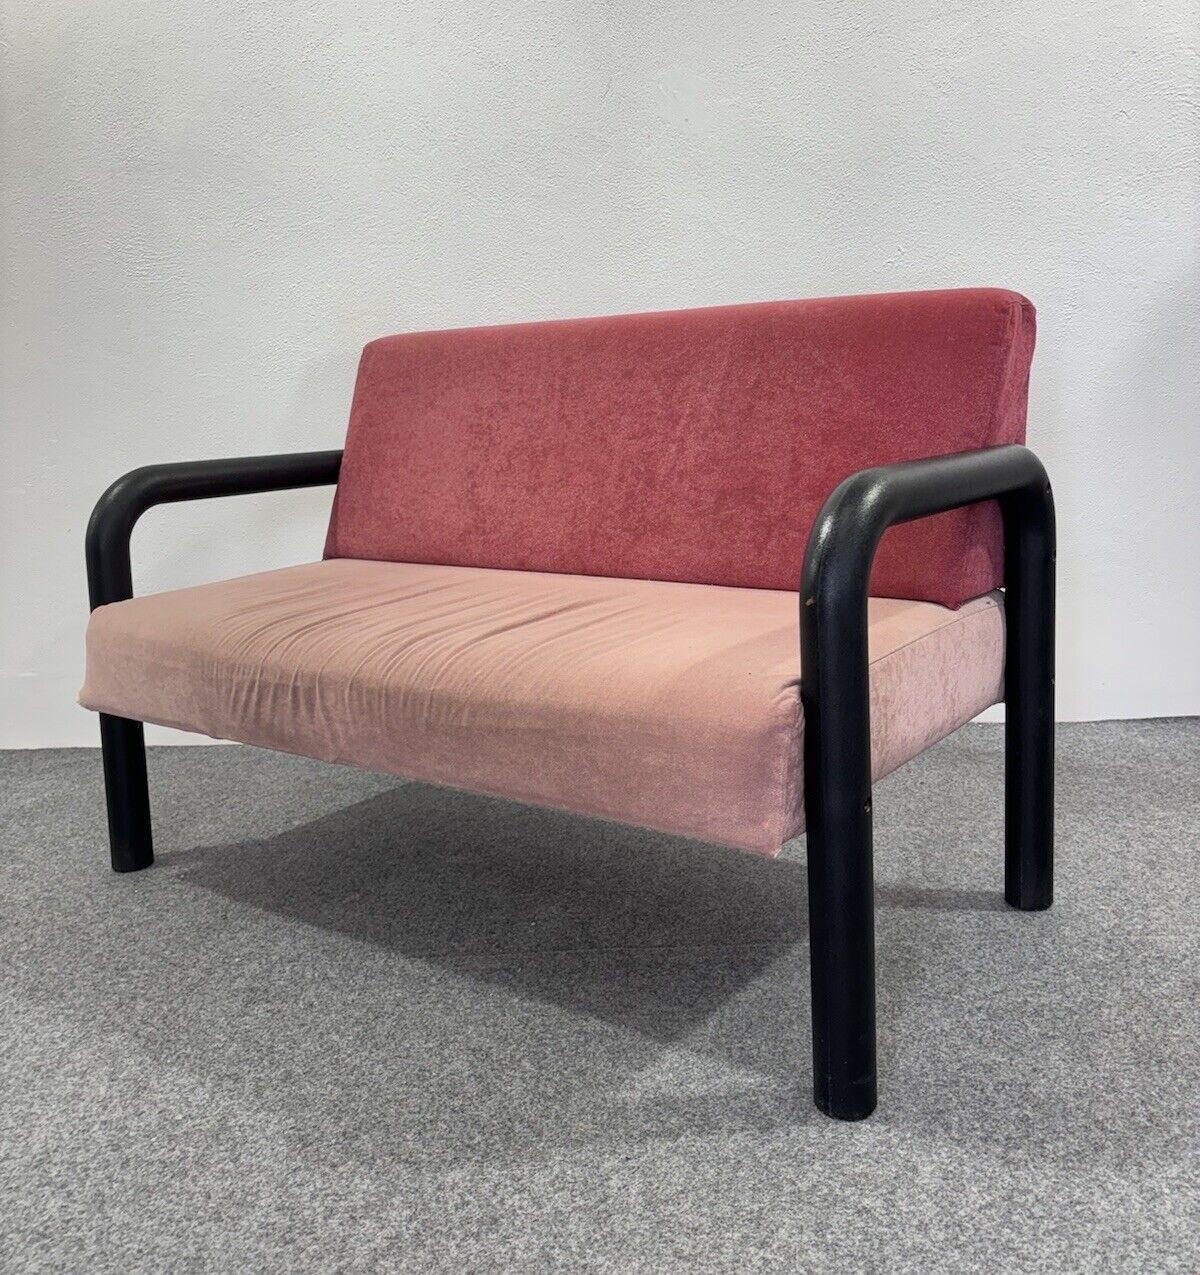 Memphis Style Two Seater Sofa Design Postmodern Modernism 1980.

Two-seater sofa with polyurethane foam frame, fabric cover in two shades of pink.

The item is in excellent conservative condition, no major cosmetic or structural flaws to report,